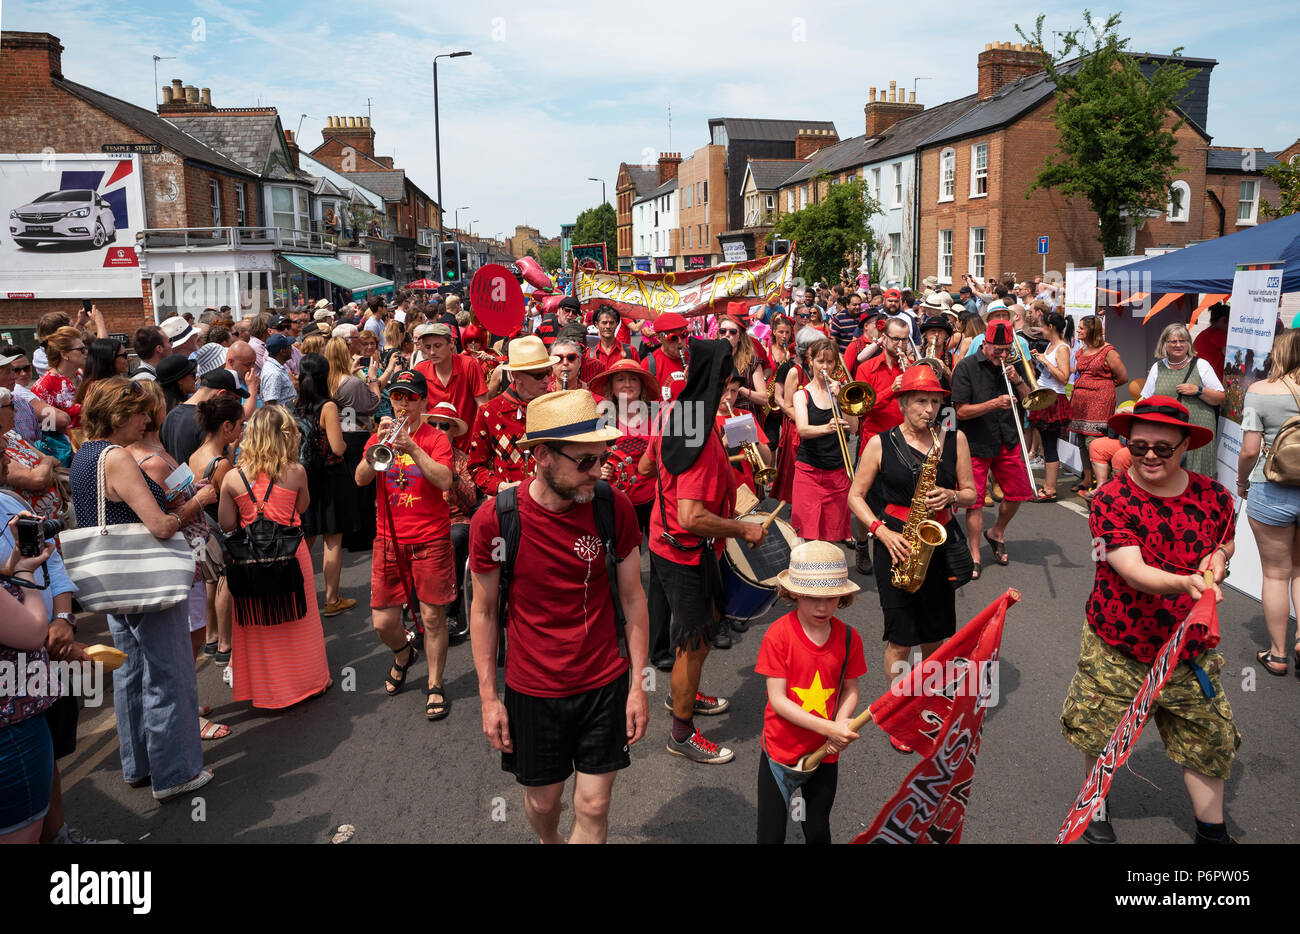 Oxford, UK. 1st July 2018. The annual Cowley Road Carnival was estimated to have drawn in 50,000 revellers to East Oxford. The hot and sunny day reached 28 degrees. This years parade theme was based upon â€˜icons of artâ€™. The carnival was organised by charity Cowley Road Works. Credit: Stephen Bell/Alamy Live News. Stock Photo